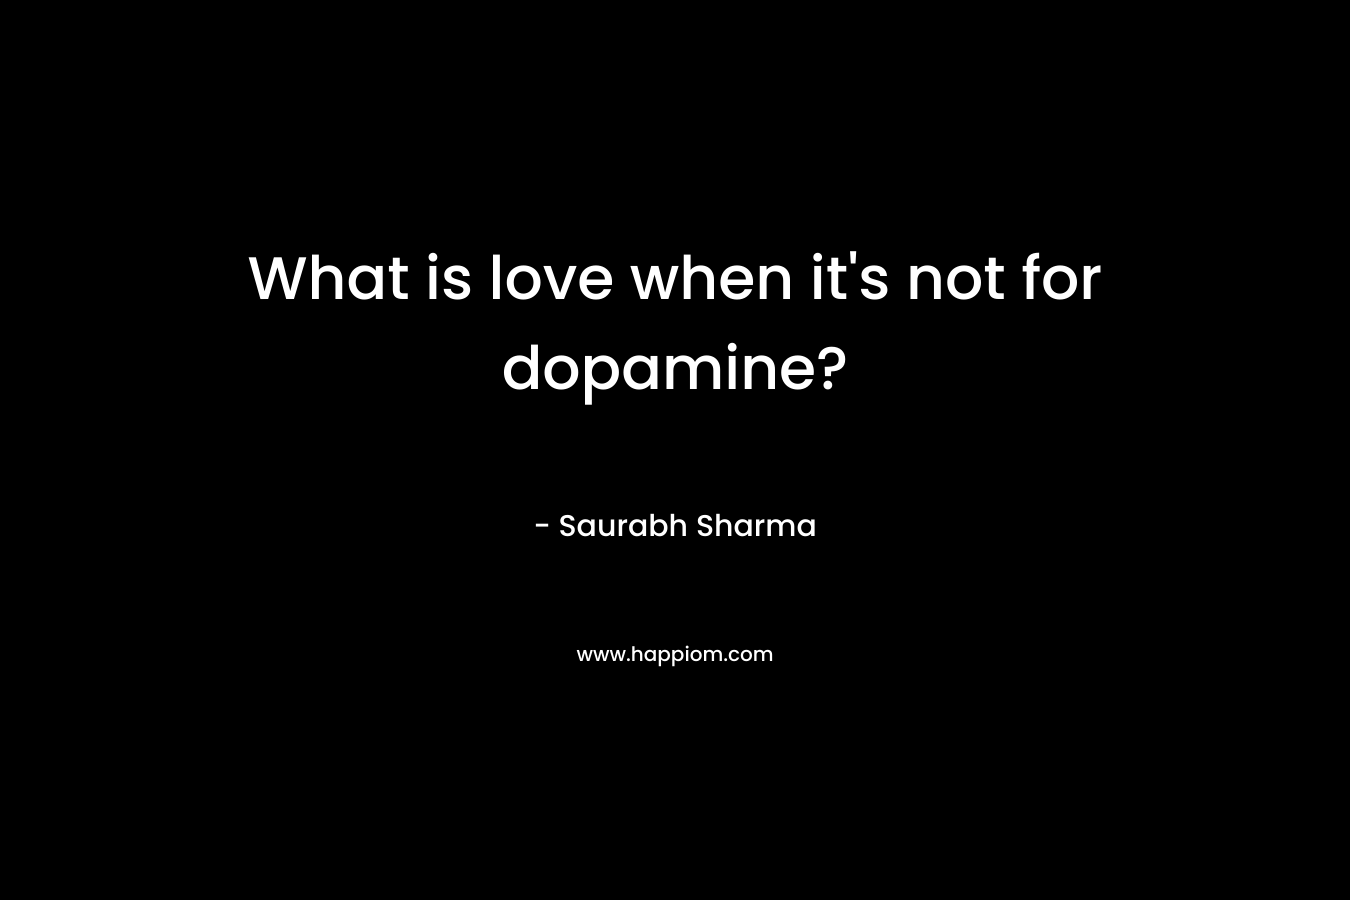 What is love when it’s not for dopamine? – Saurabh Sharma